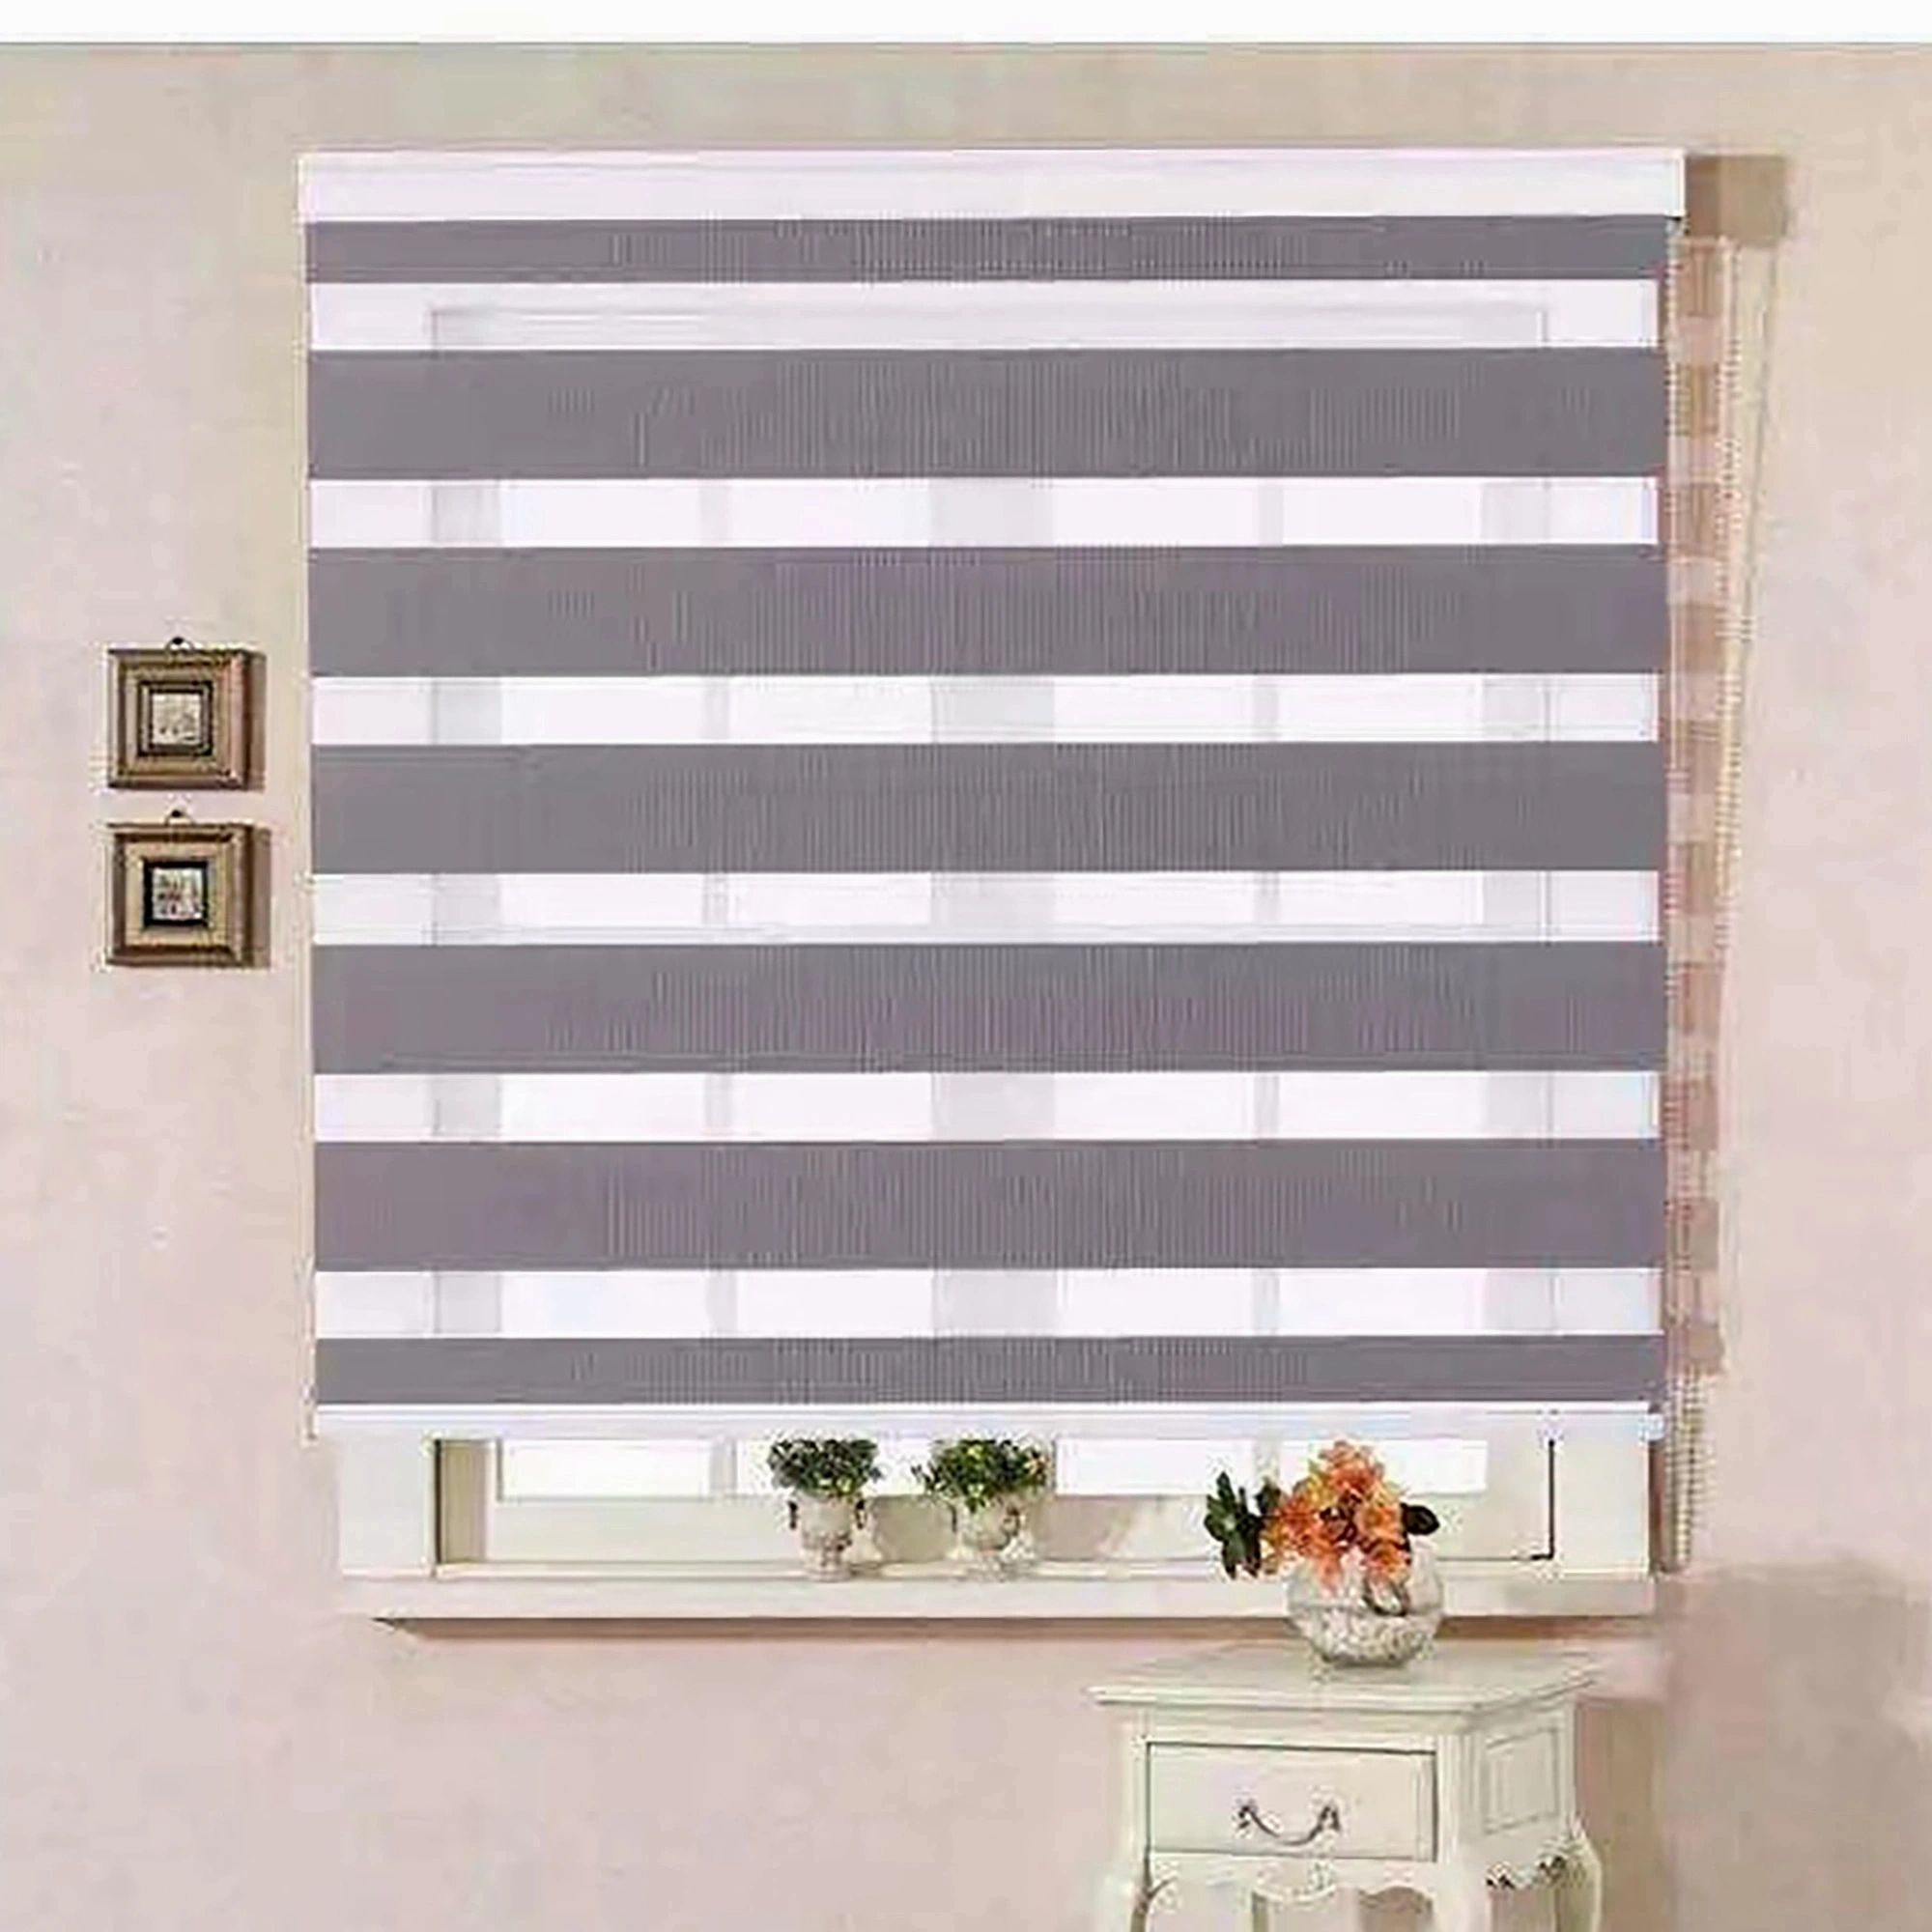 Sweet Comfy Living Duo Roller Blinds Curtains Roller Blinds For Home Living Room Kitchen Bathroom Office 100x180cm Bb 480 Lazada Ph